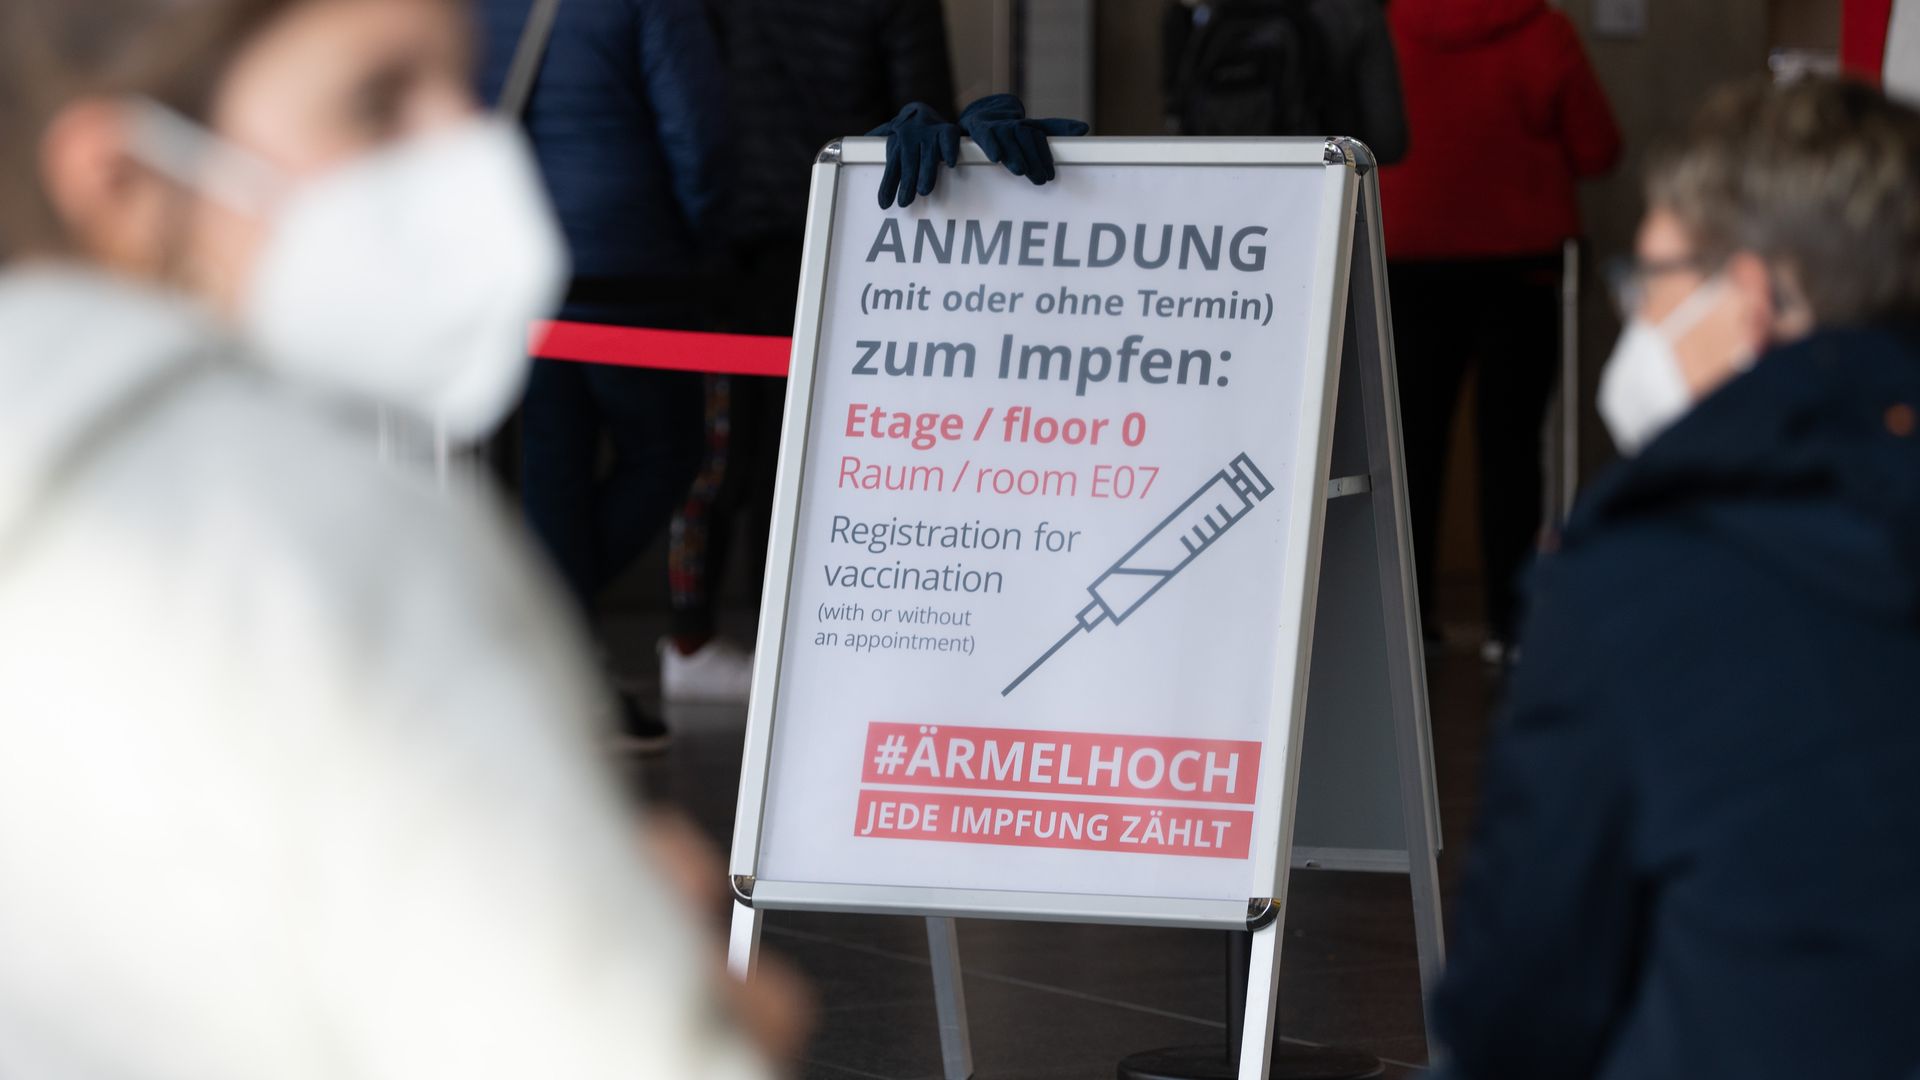 A photo of a sign in German discussing vaccination at a clinic